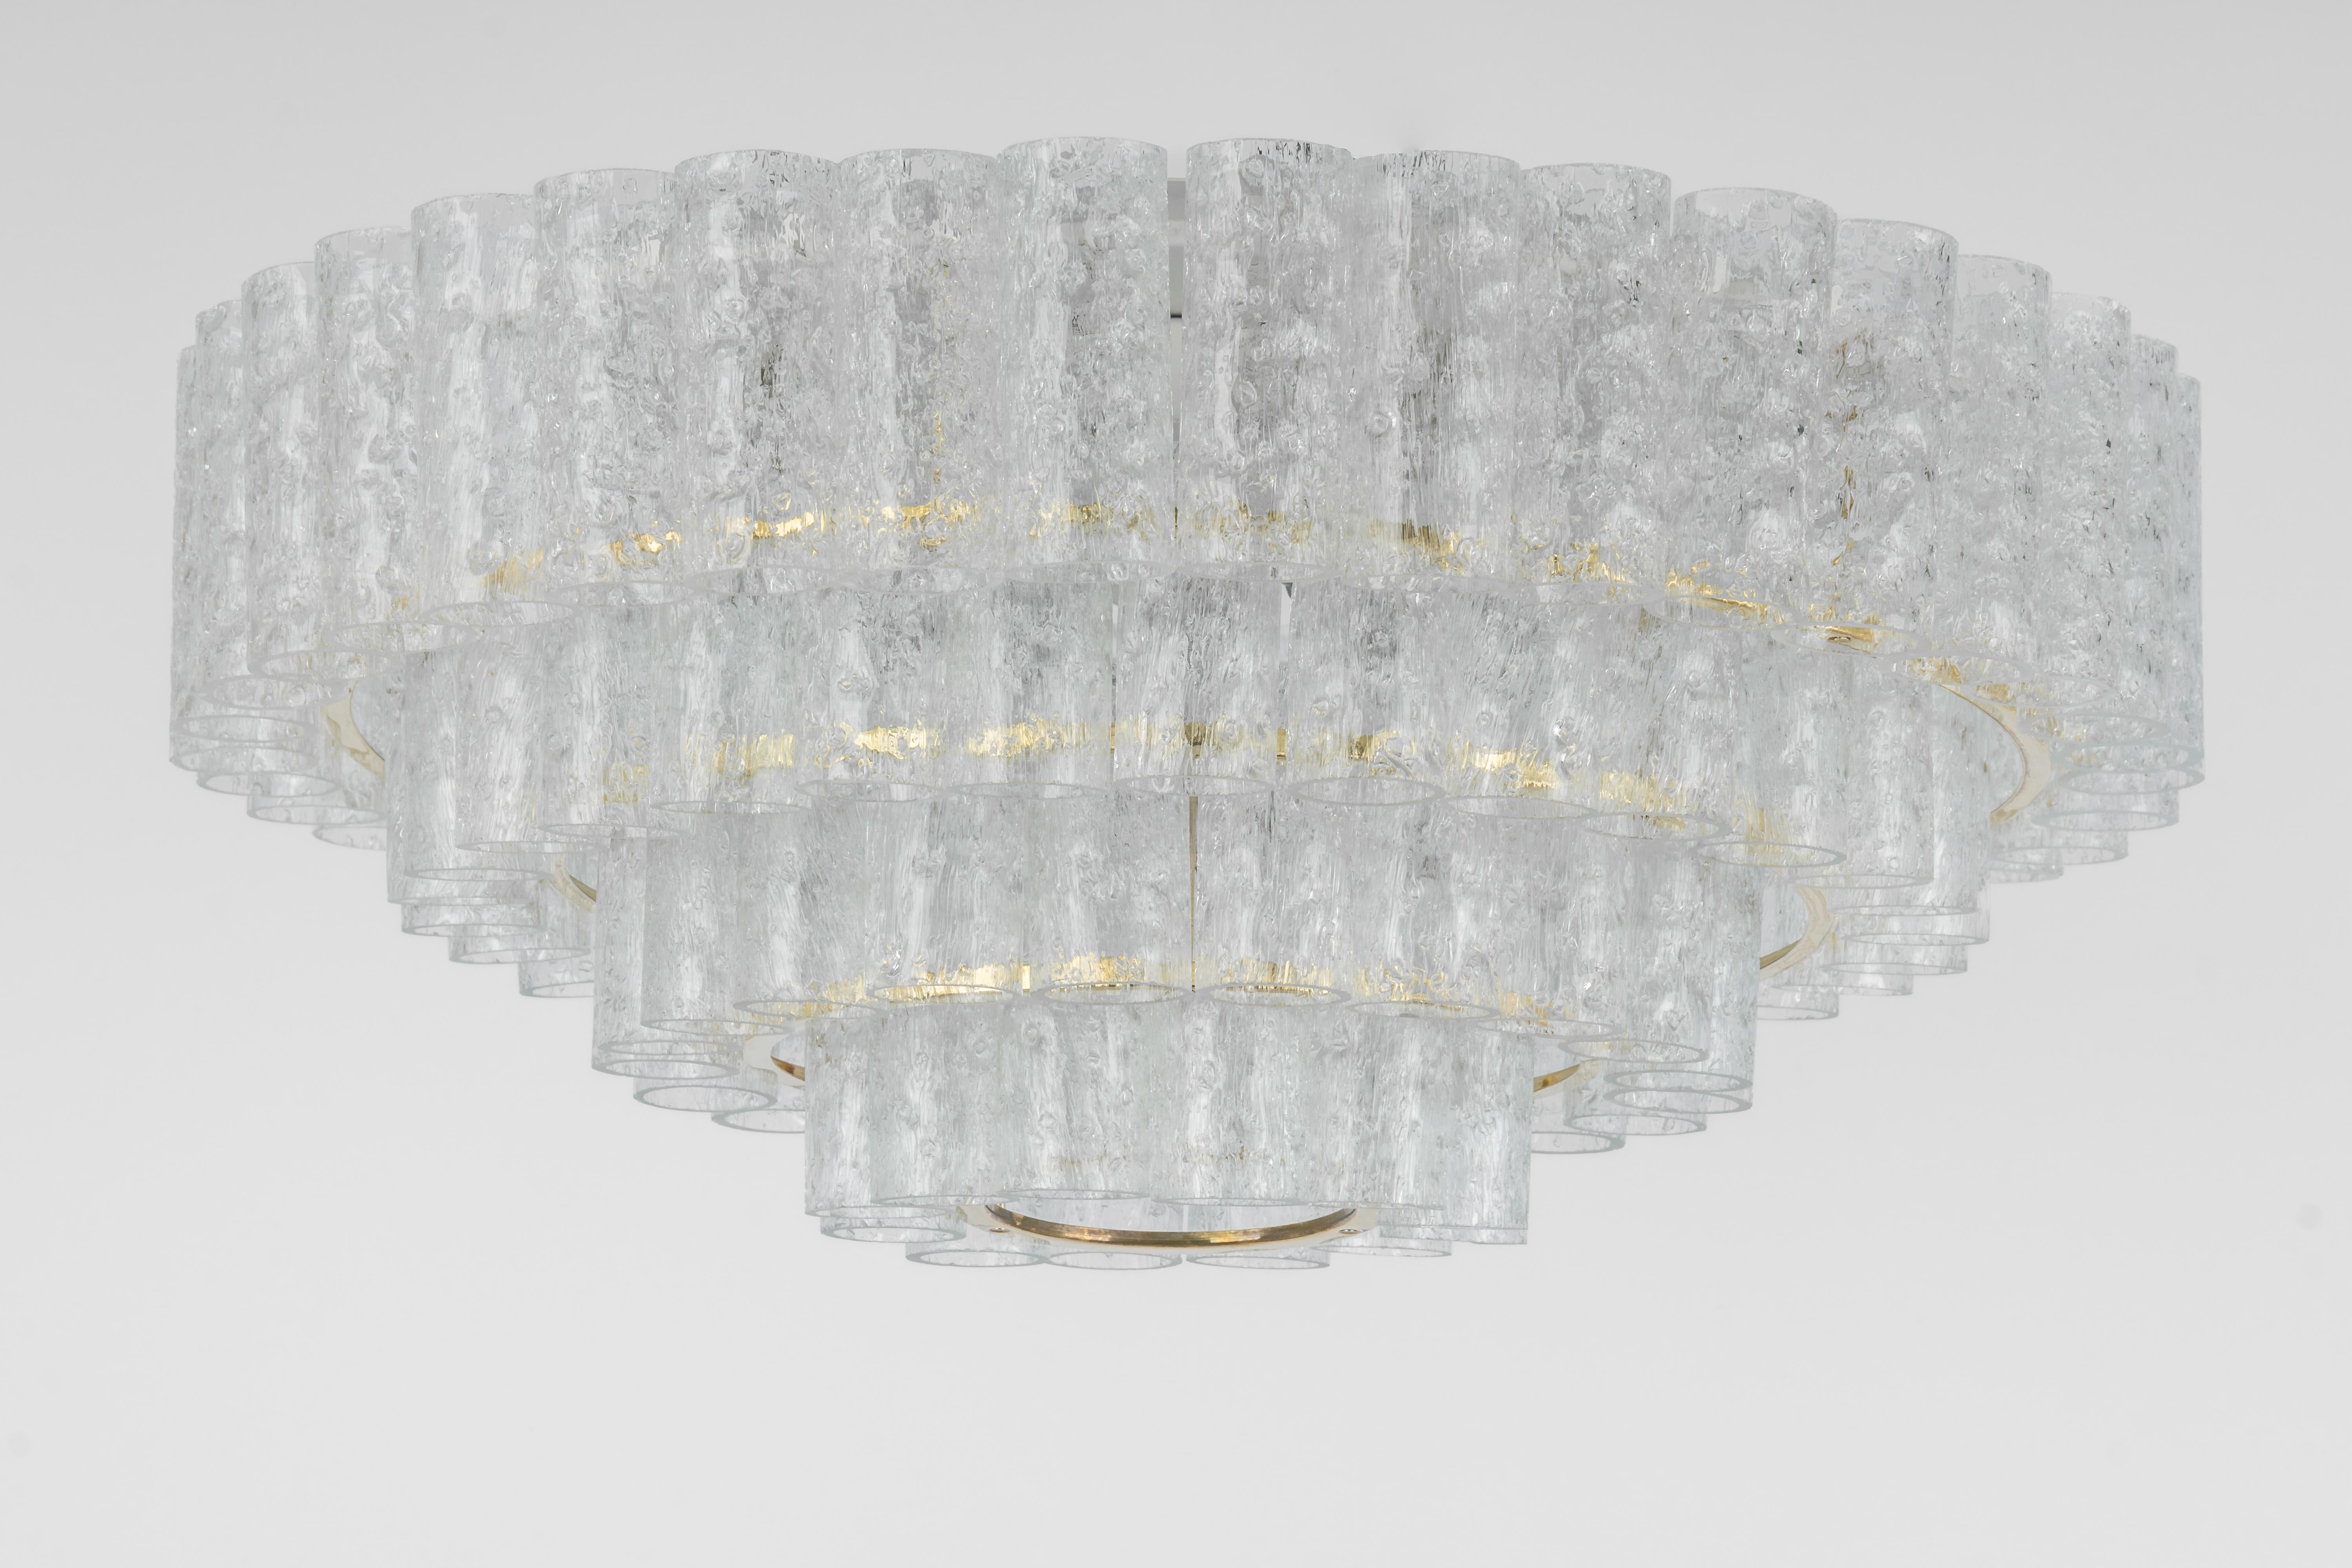 Fantastic four-tier midcentury chandelier by Doria, Germany, manufactured, circa 1960-1969. Four rings of Murano glass cylinders suspended from a fixture.
Heavy quality and in very good condition. Cleaned, well-wired and ready to use.
The fixture